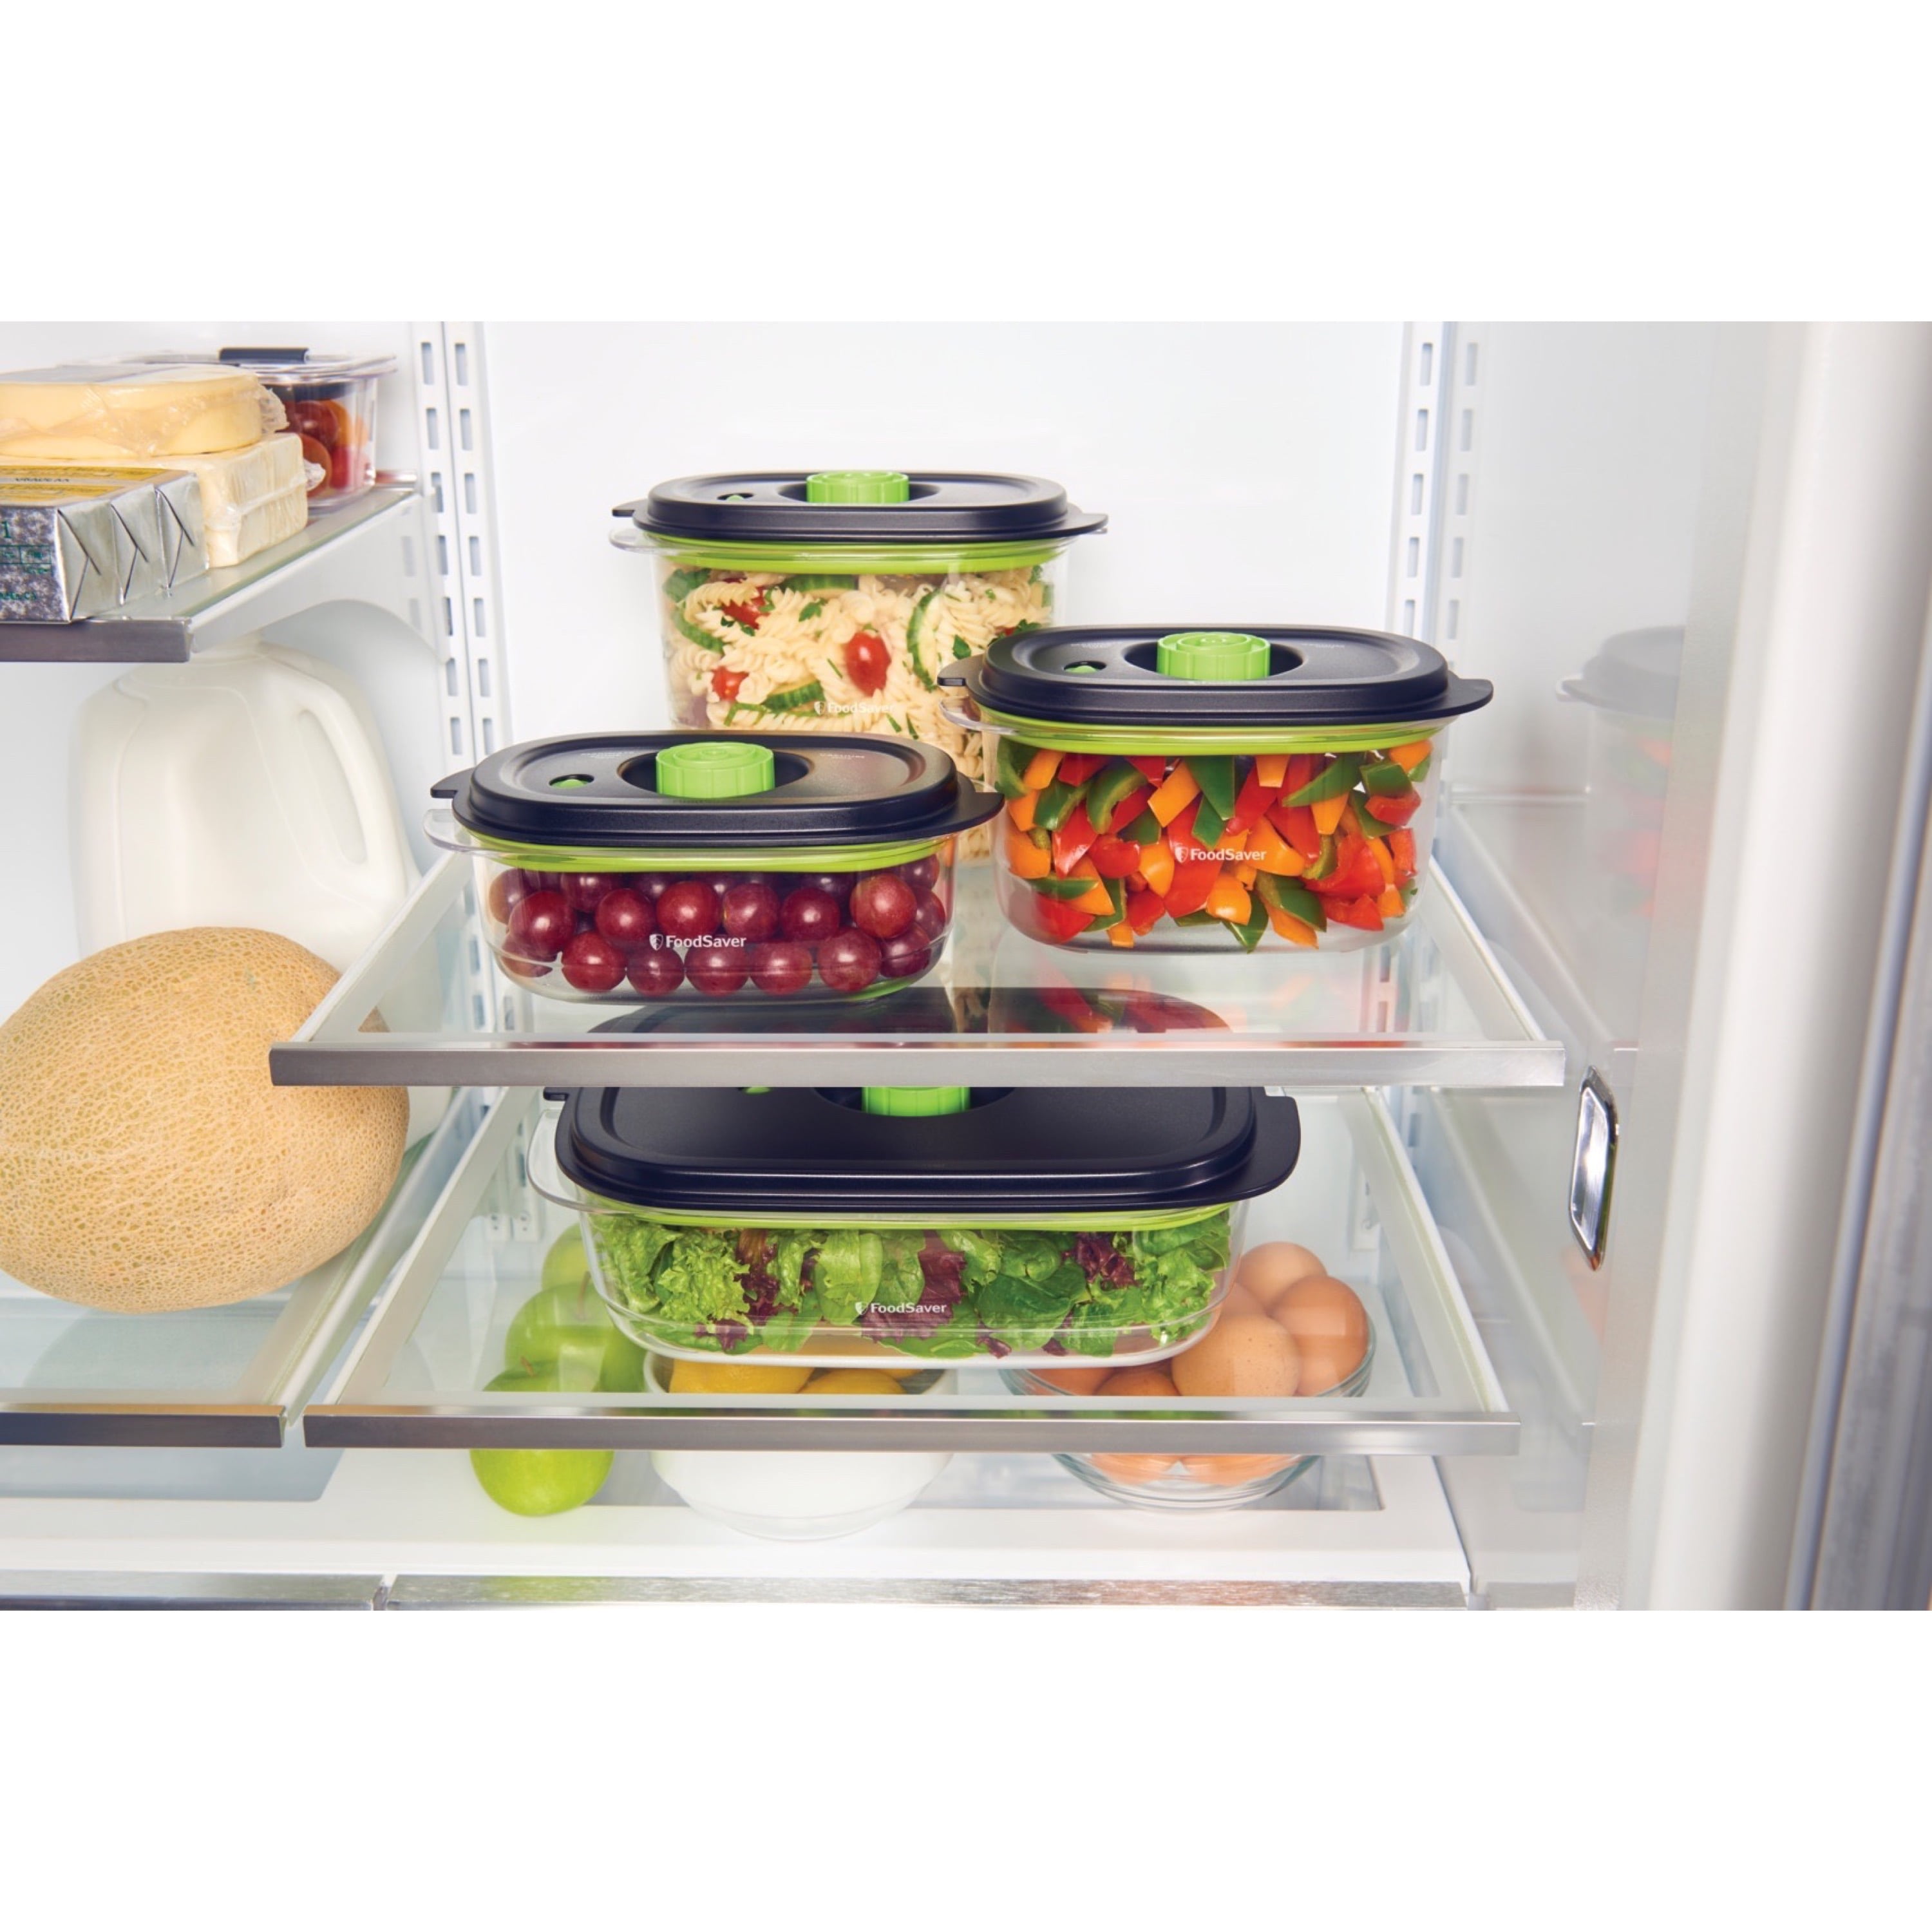 FoodSaver® Preserve & Marinate Vacuum Containers, 5 Cup, 2-Pack